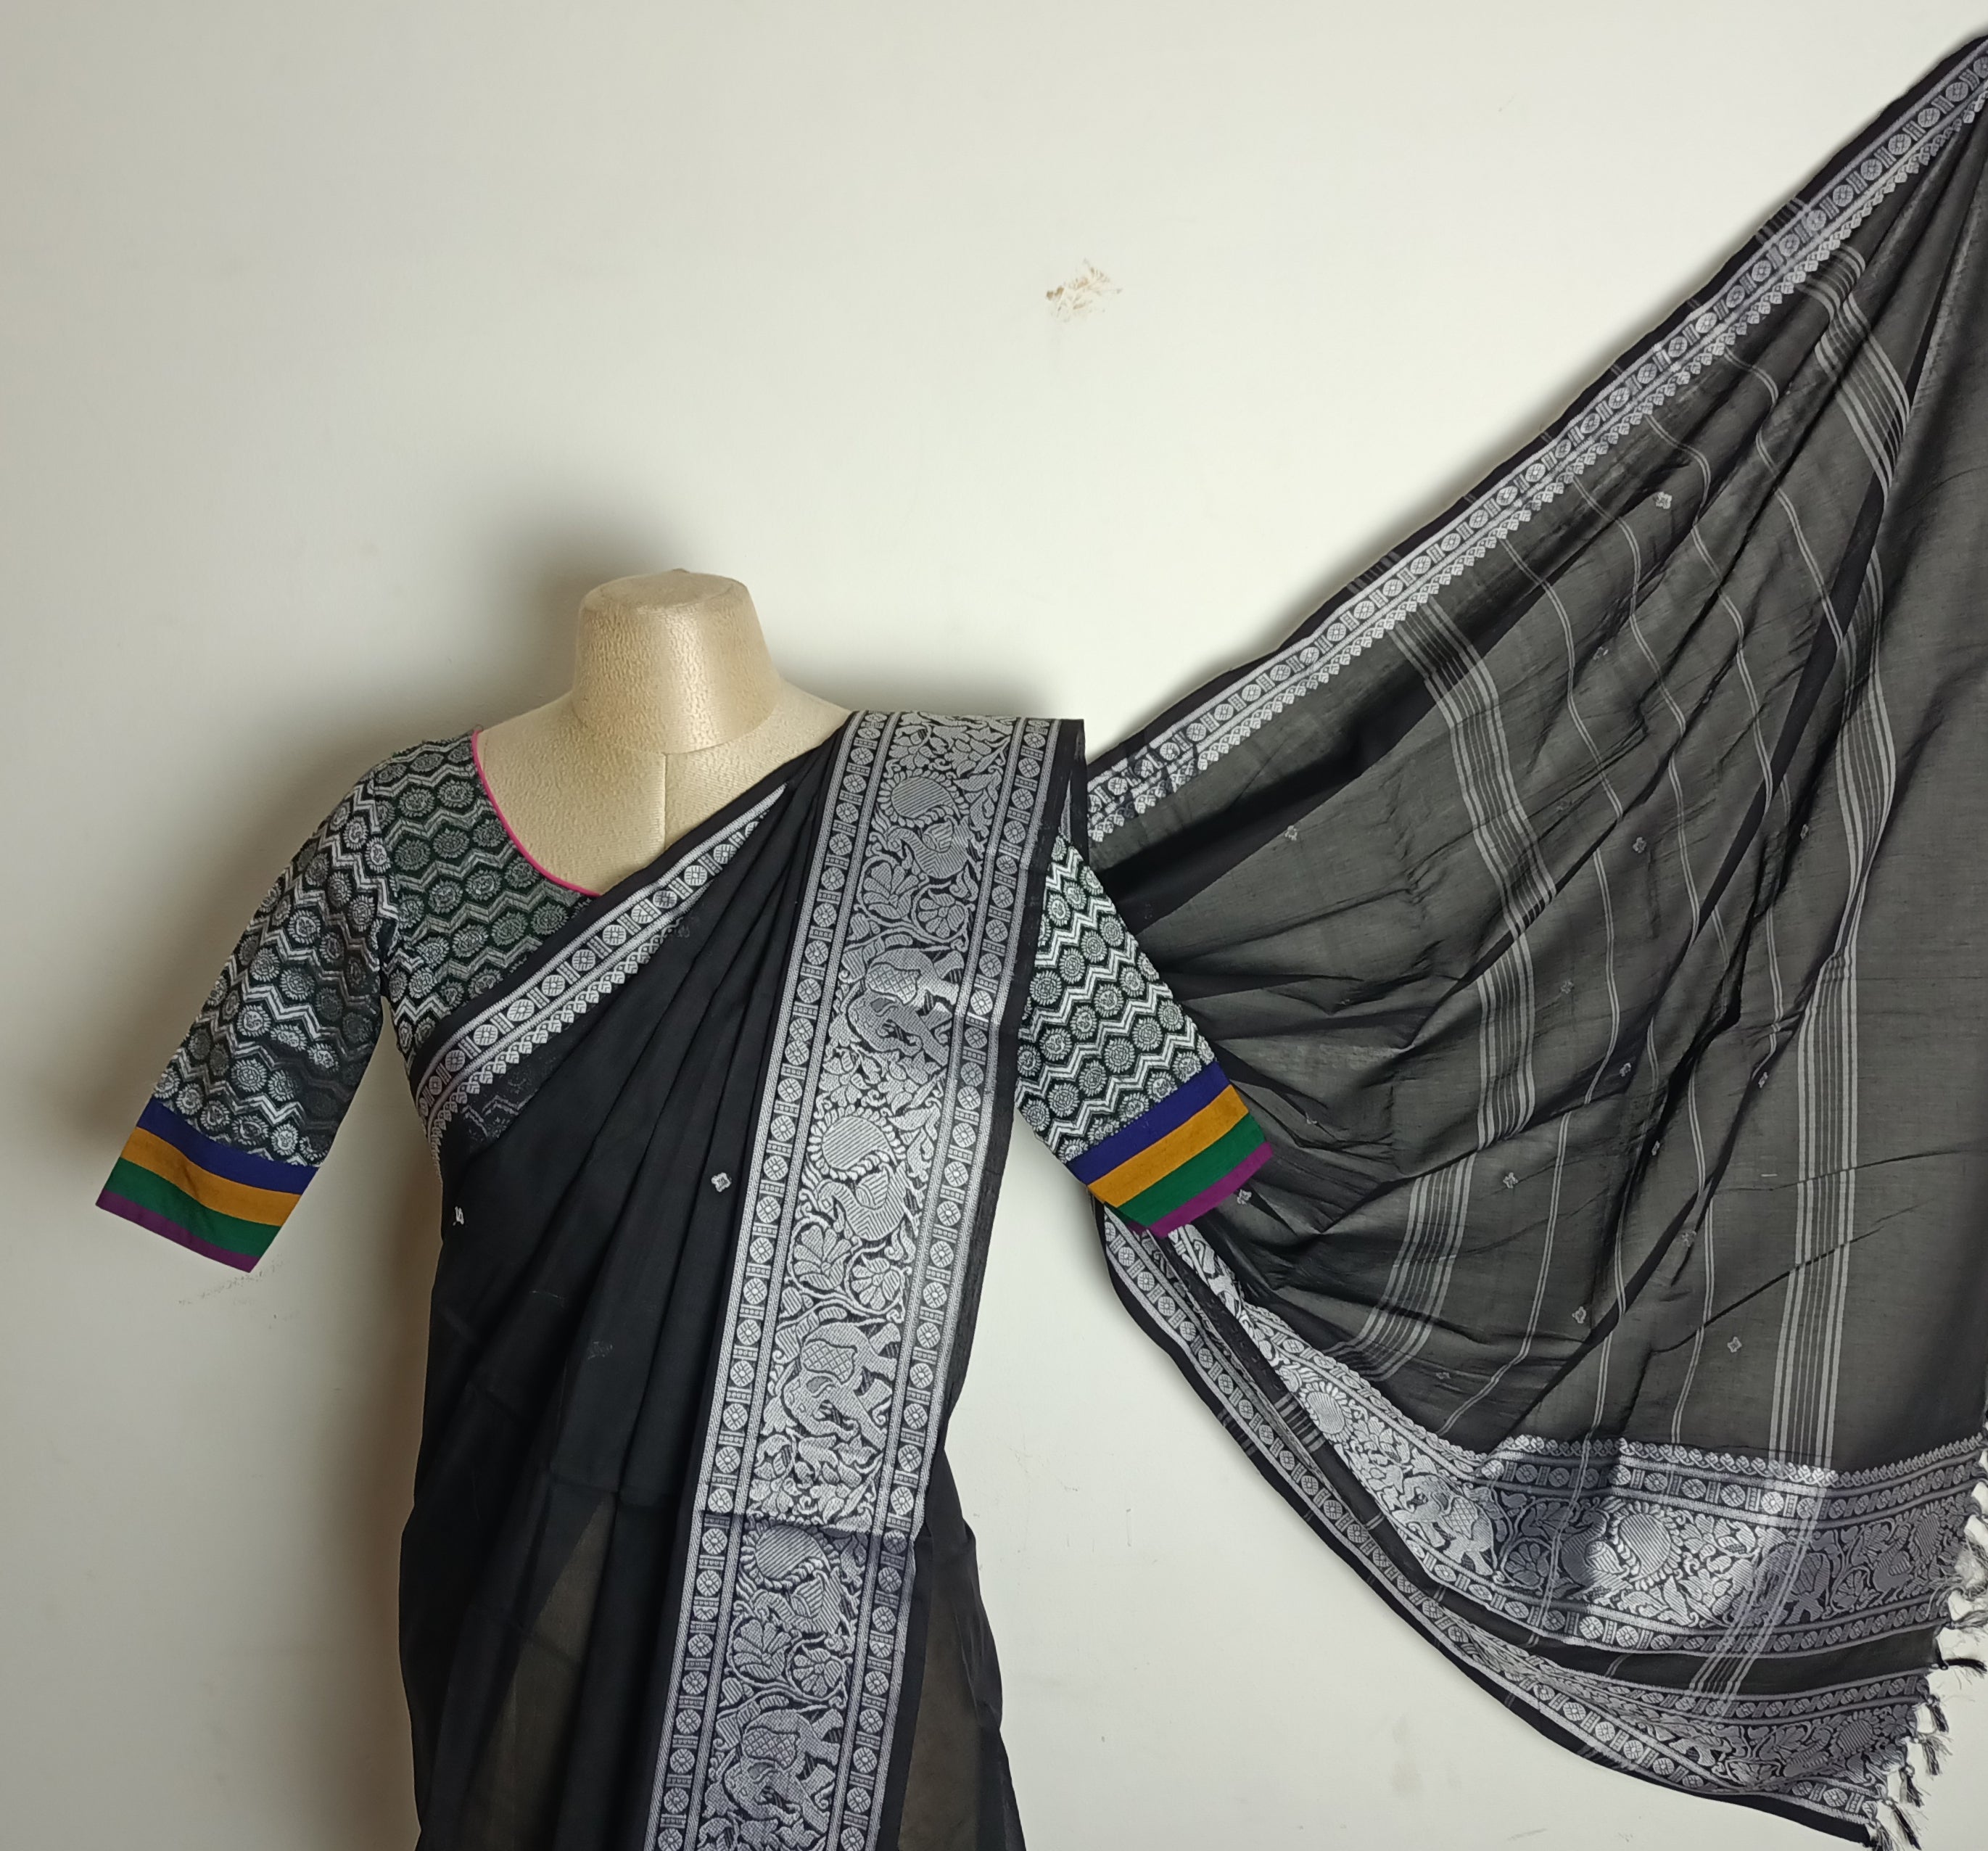 Black with grey border chettinad saree paired with a lotus khun blouse - Saree blouse combo